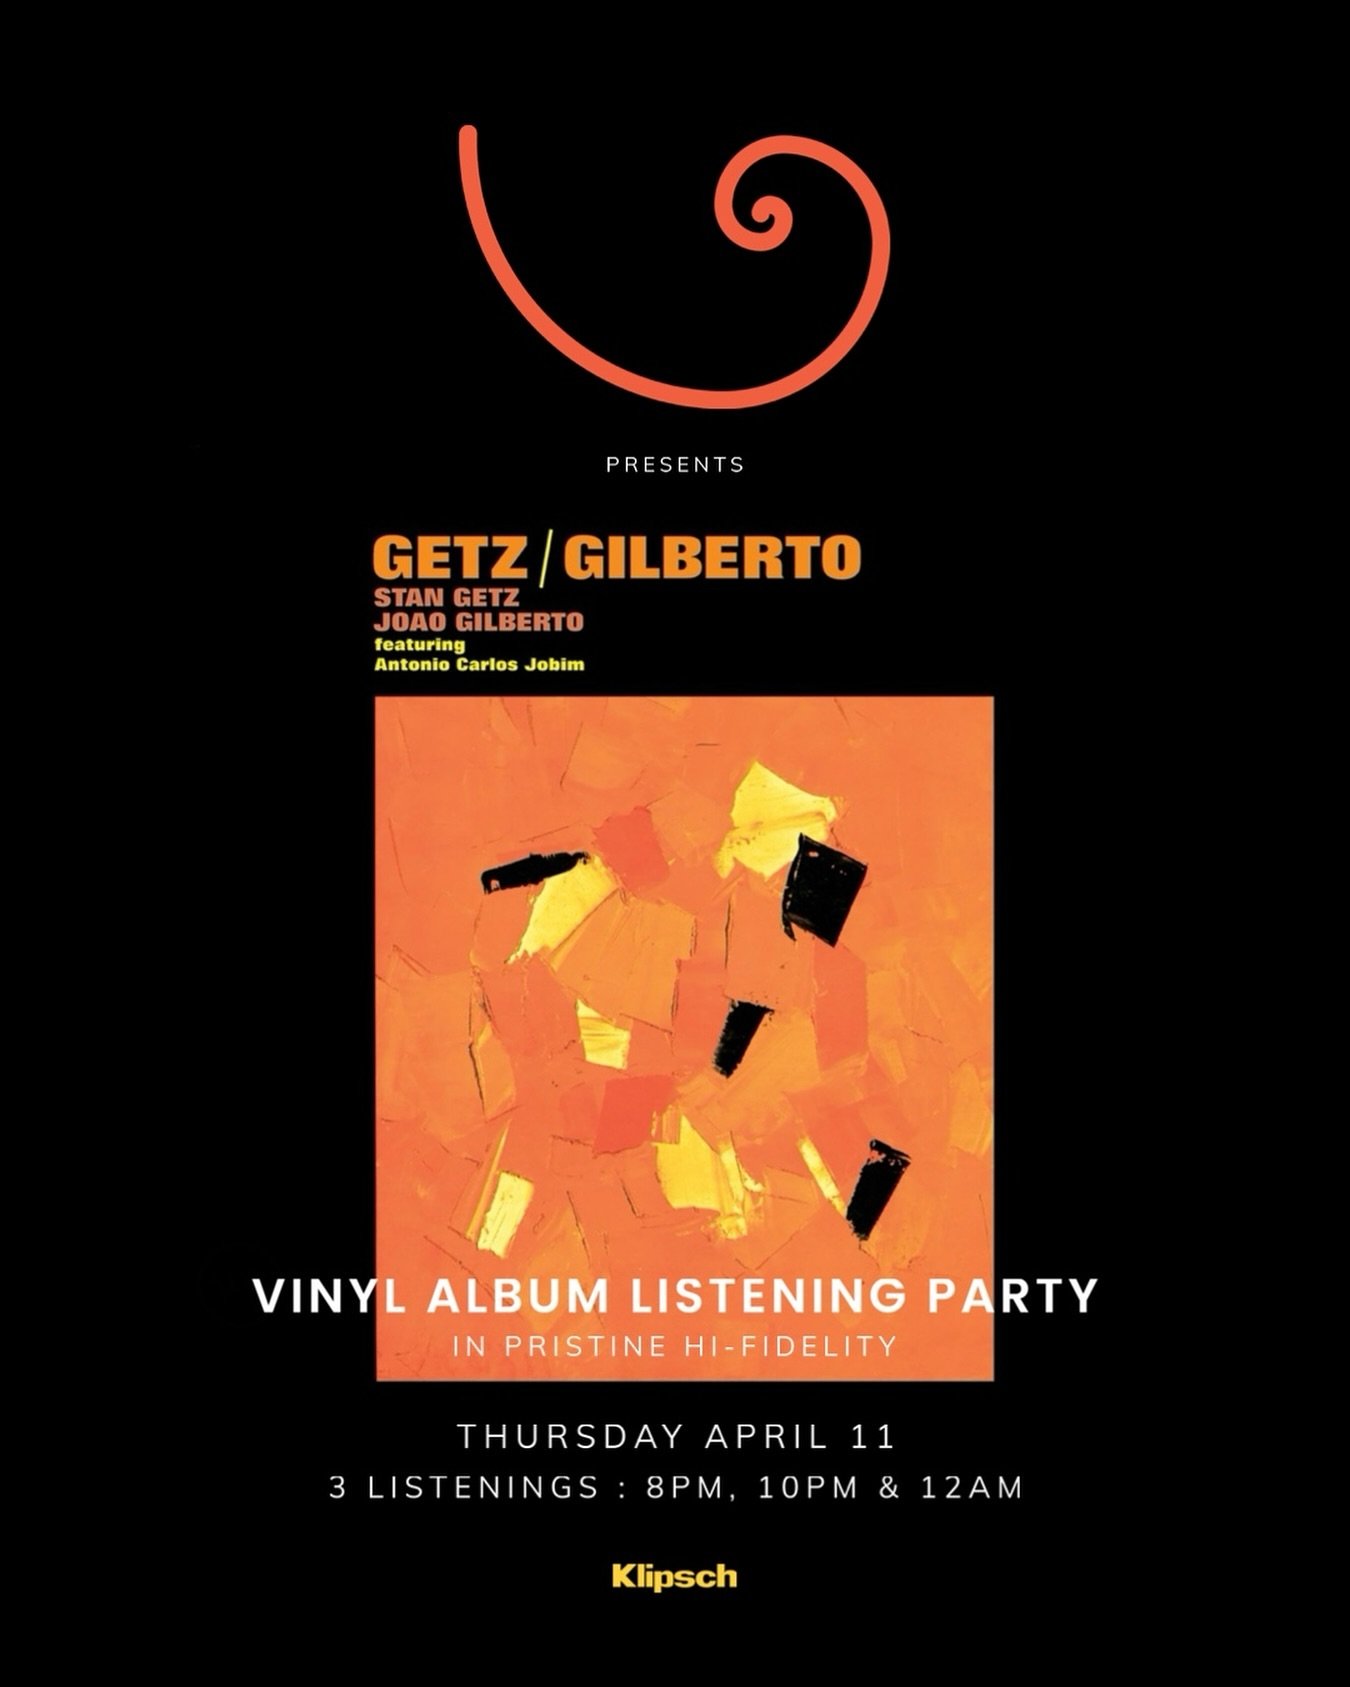 Our Vinyl Album Listening Party is back this Thursday night with an absolute gem of an Album. 

Gets/Gilberto

Getz/Gilberto is considered the record that popularized bossa nova worldwide and is one of the best-selling jazz albums of all time, sellin